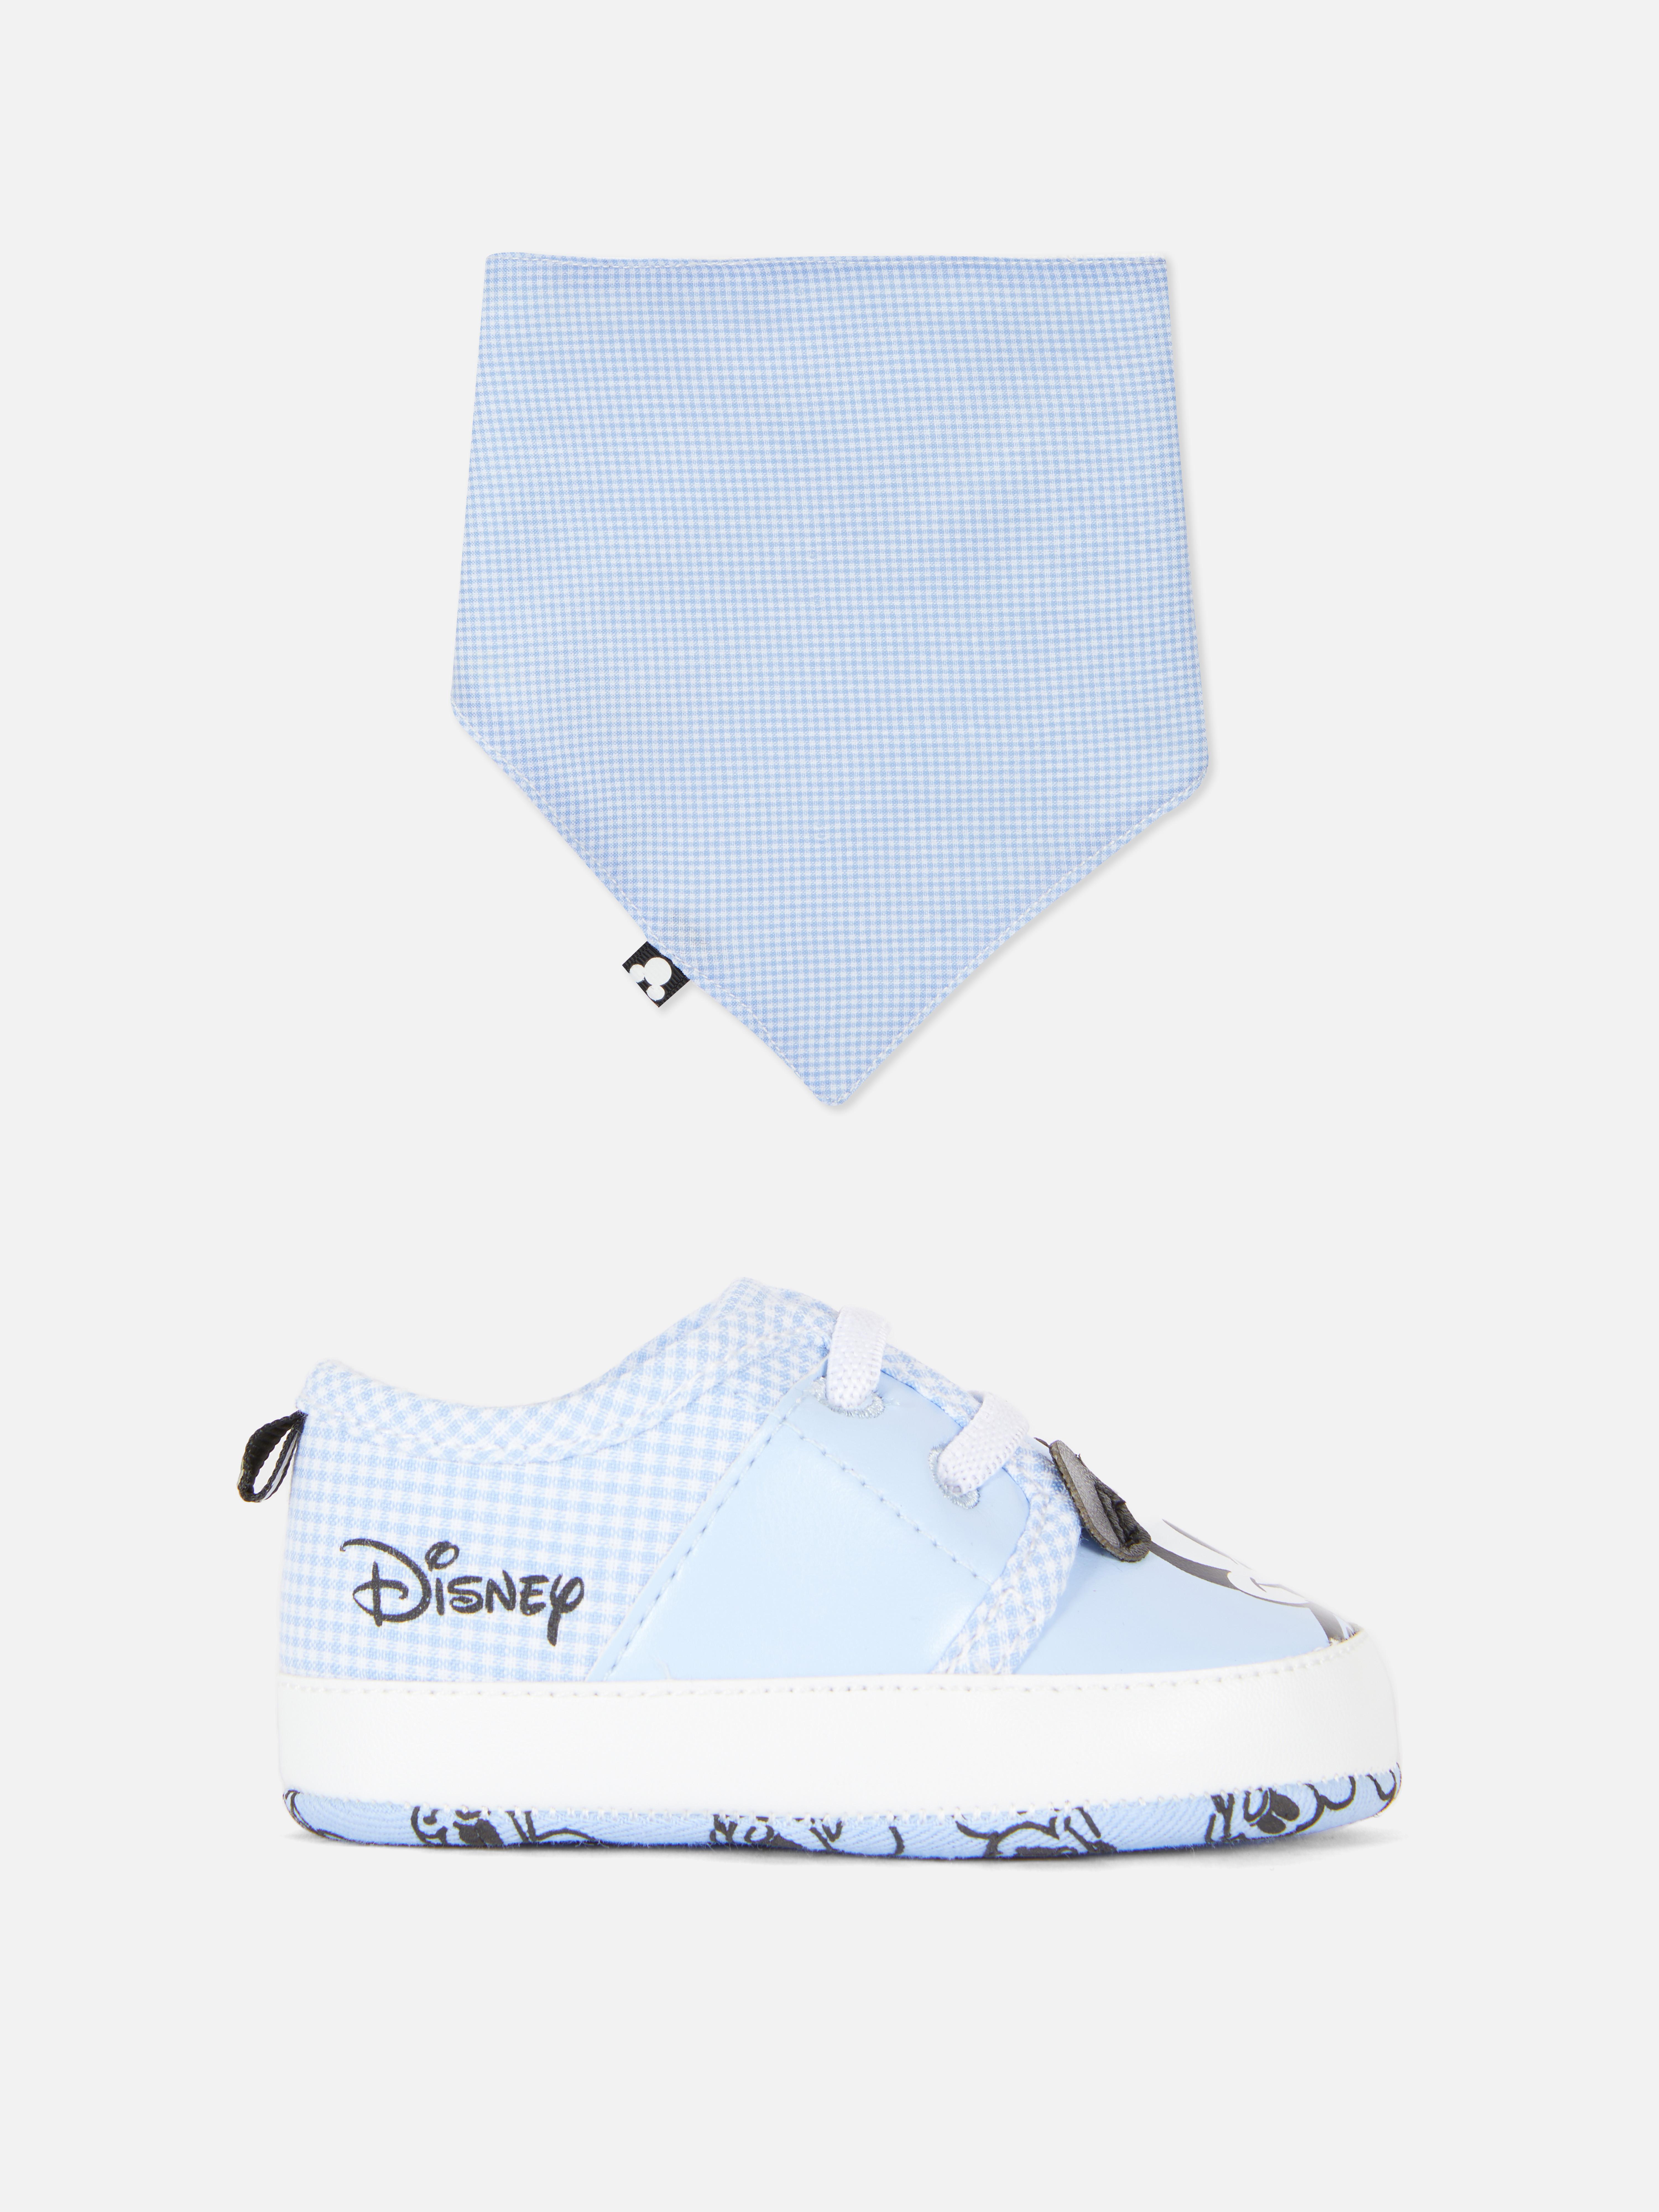 Disney’s Mickey Mouse Shoes and Bib Set